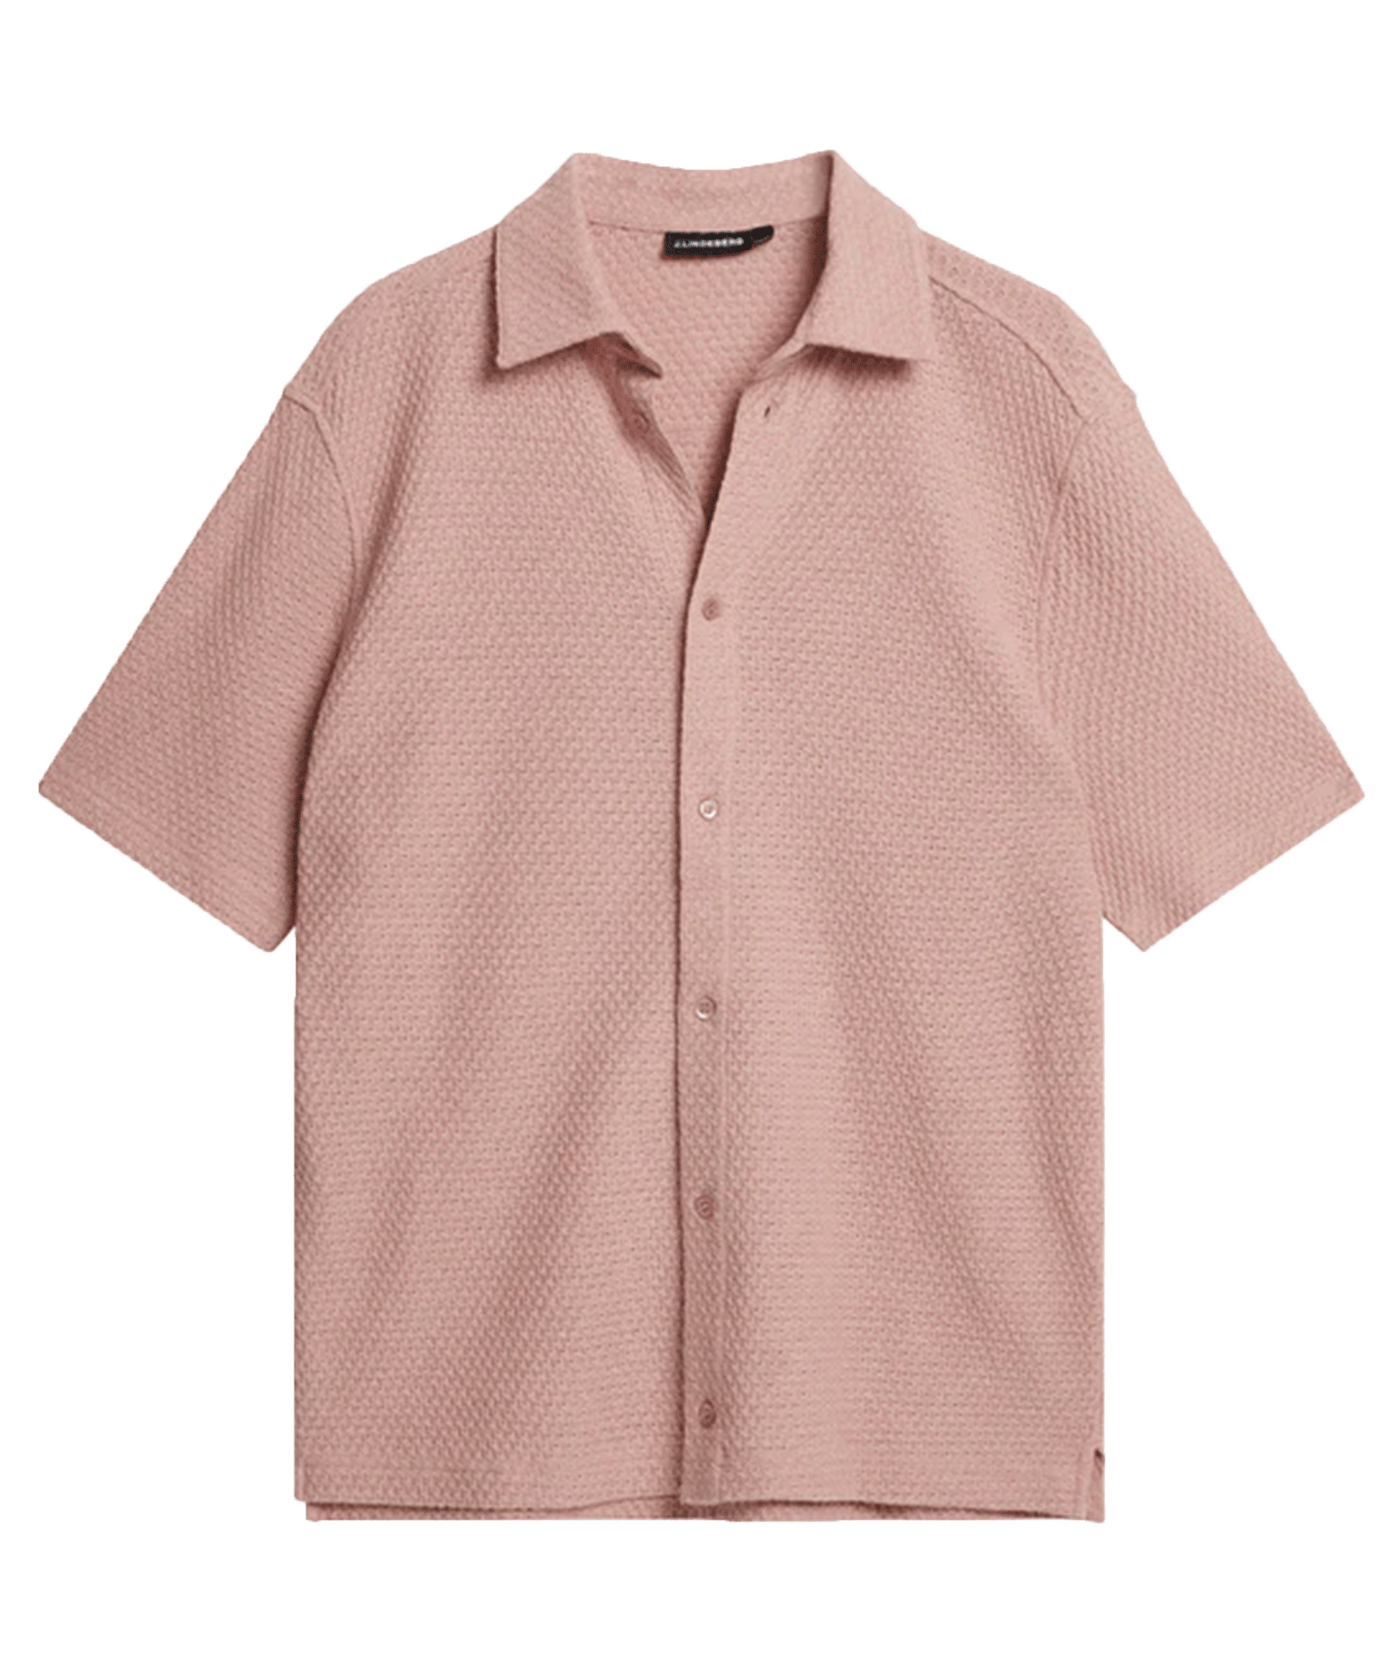 J Lindeberg - Torpa Airy - Structure Shirt - S022 Powder Pink